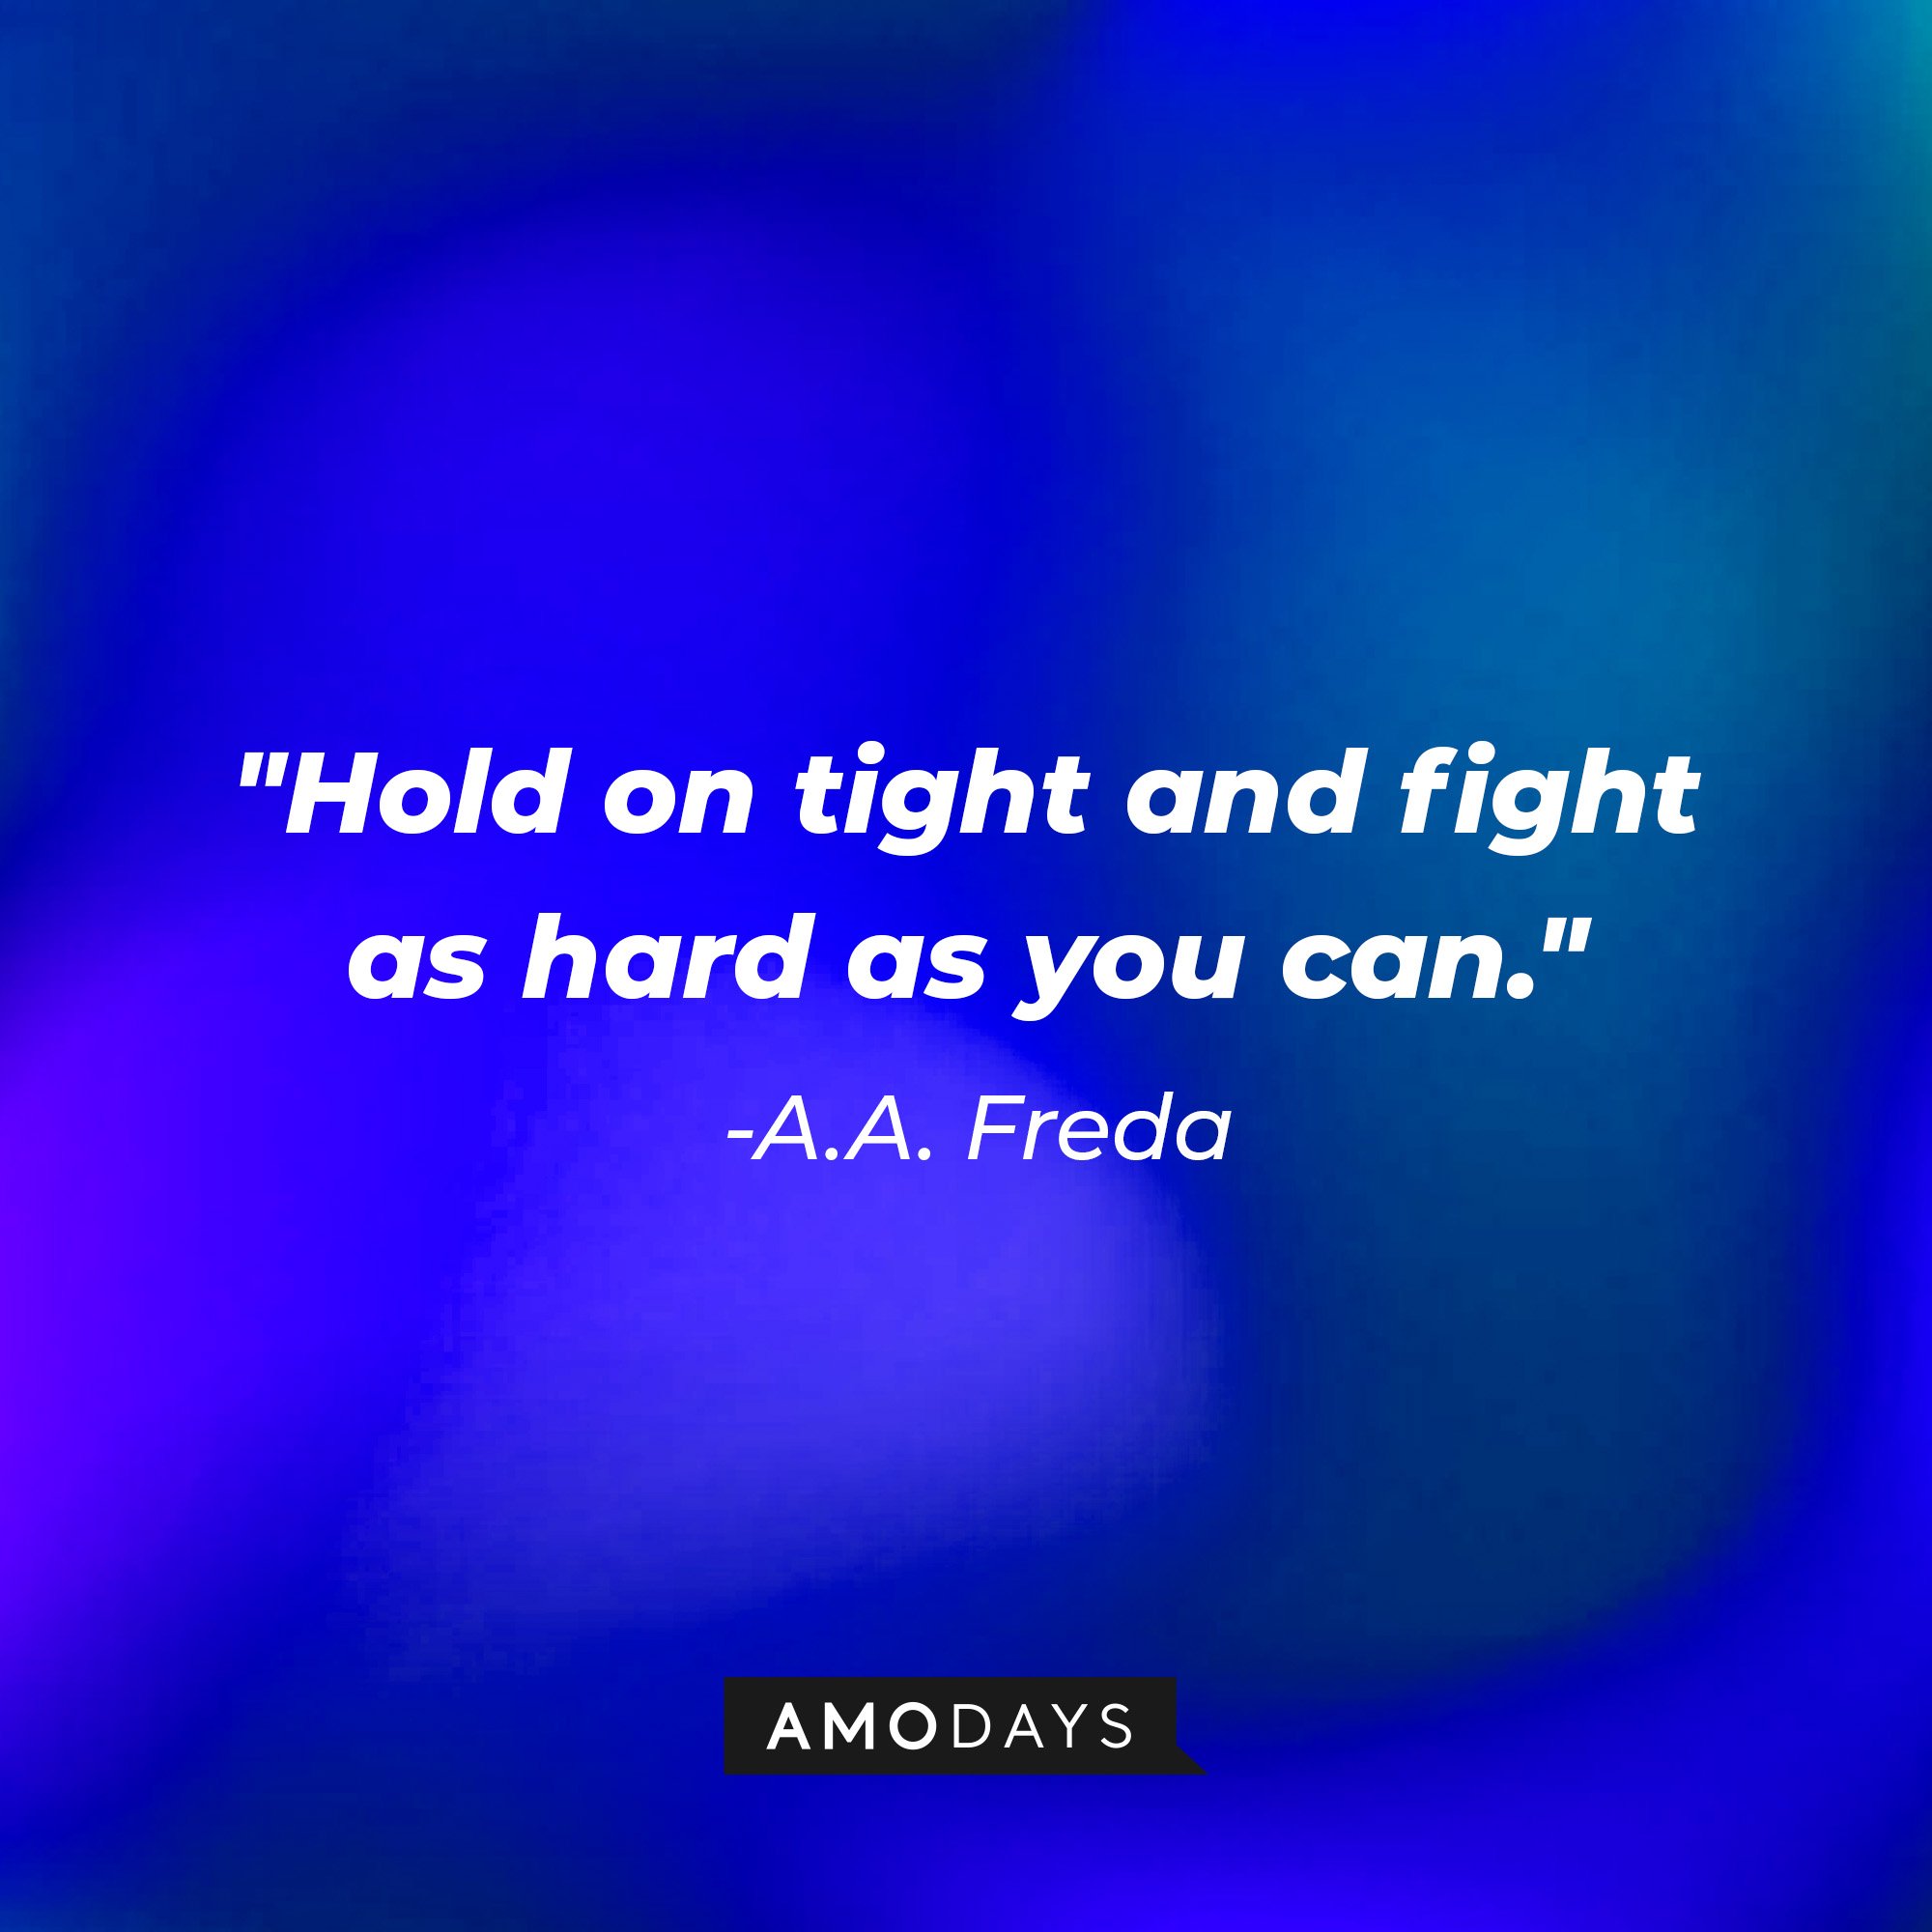  A.A. Fredas' quote: "Hold on tight and fight as hard as you can." | Image: AmoDays